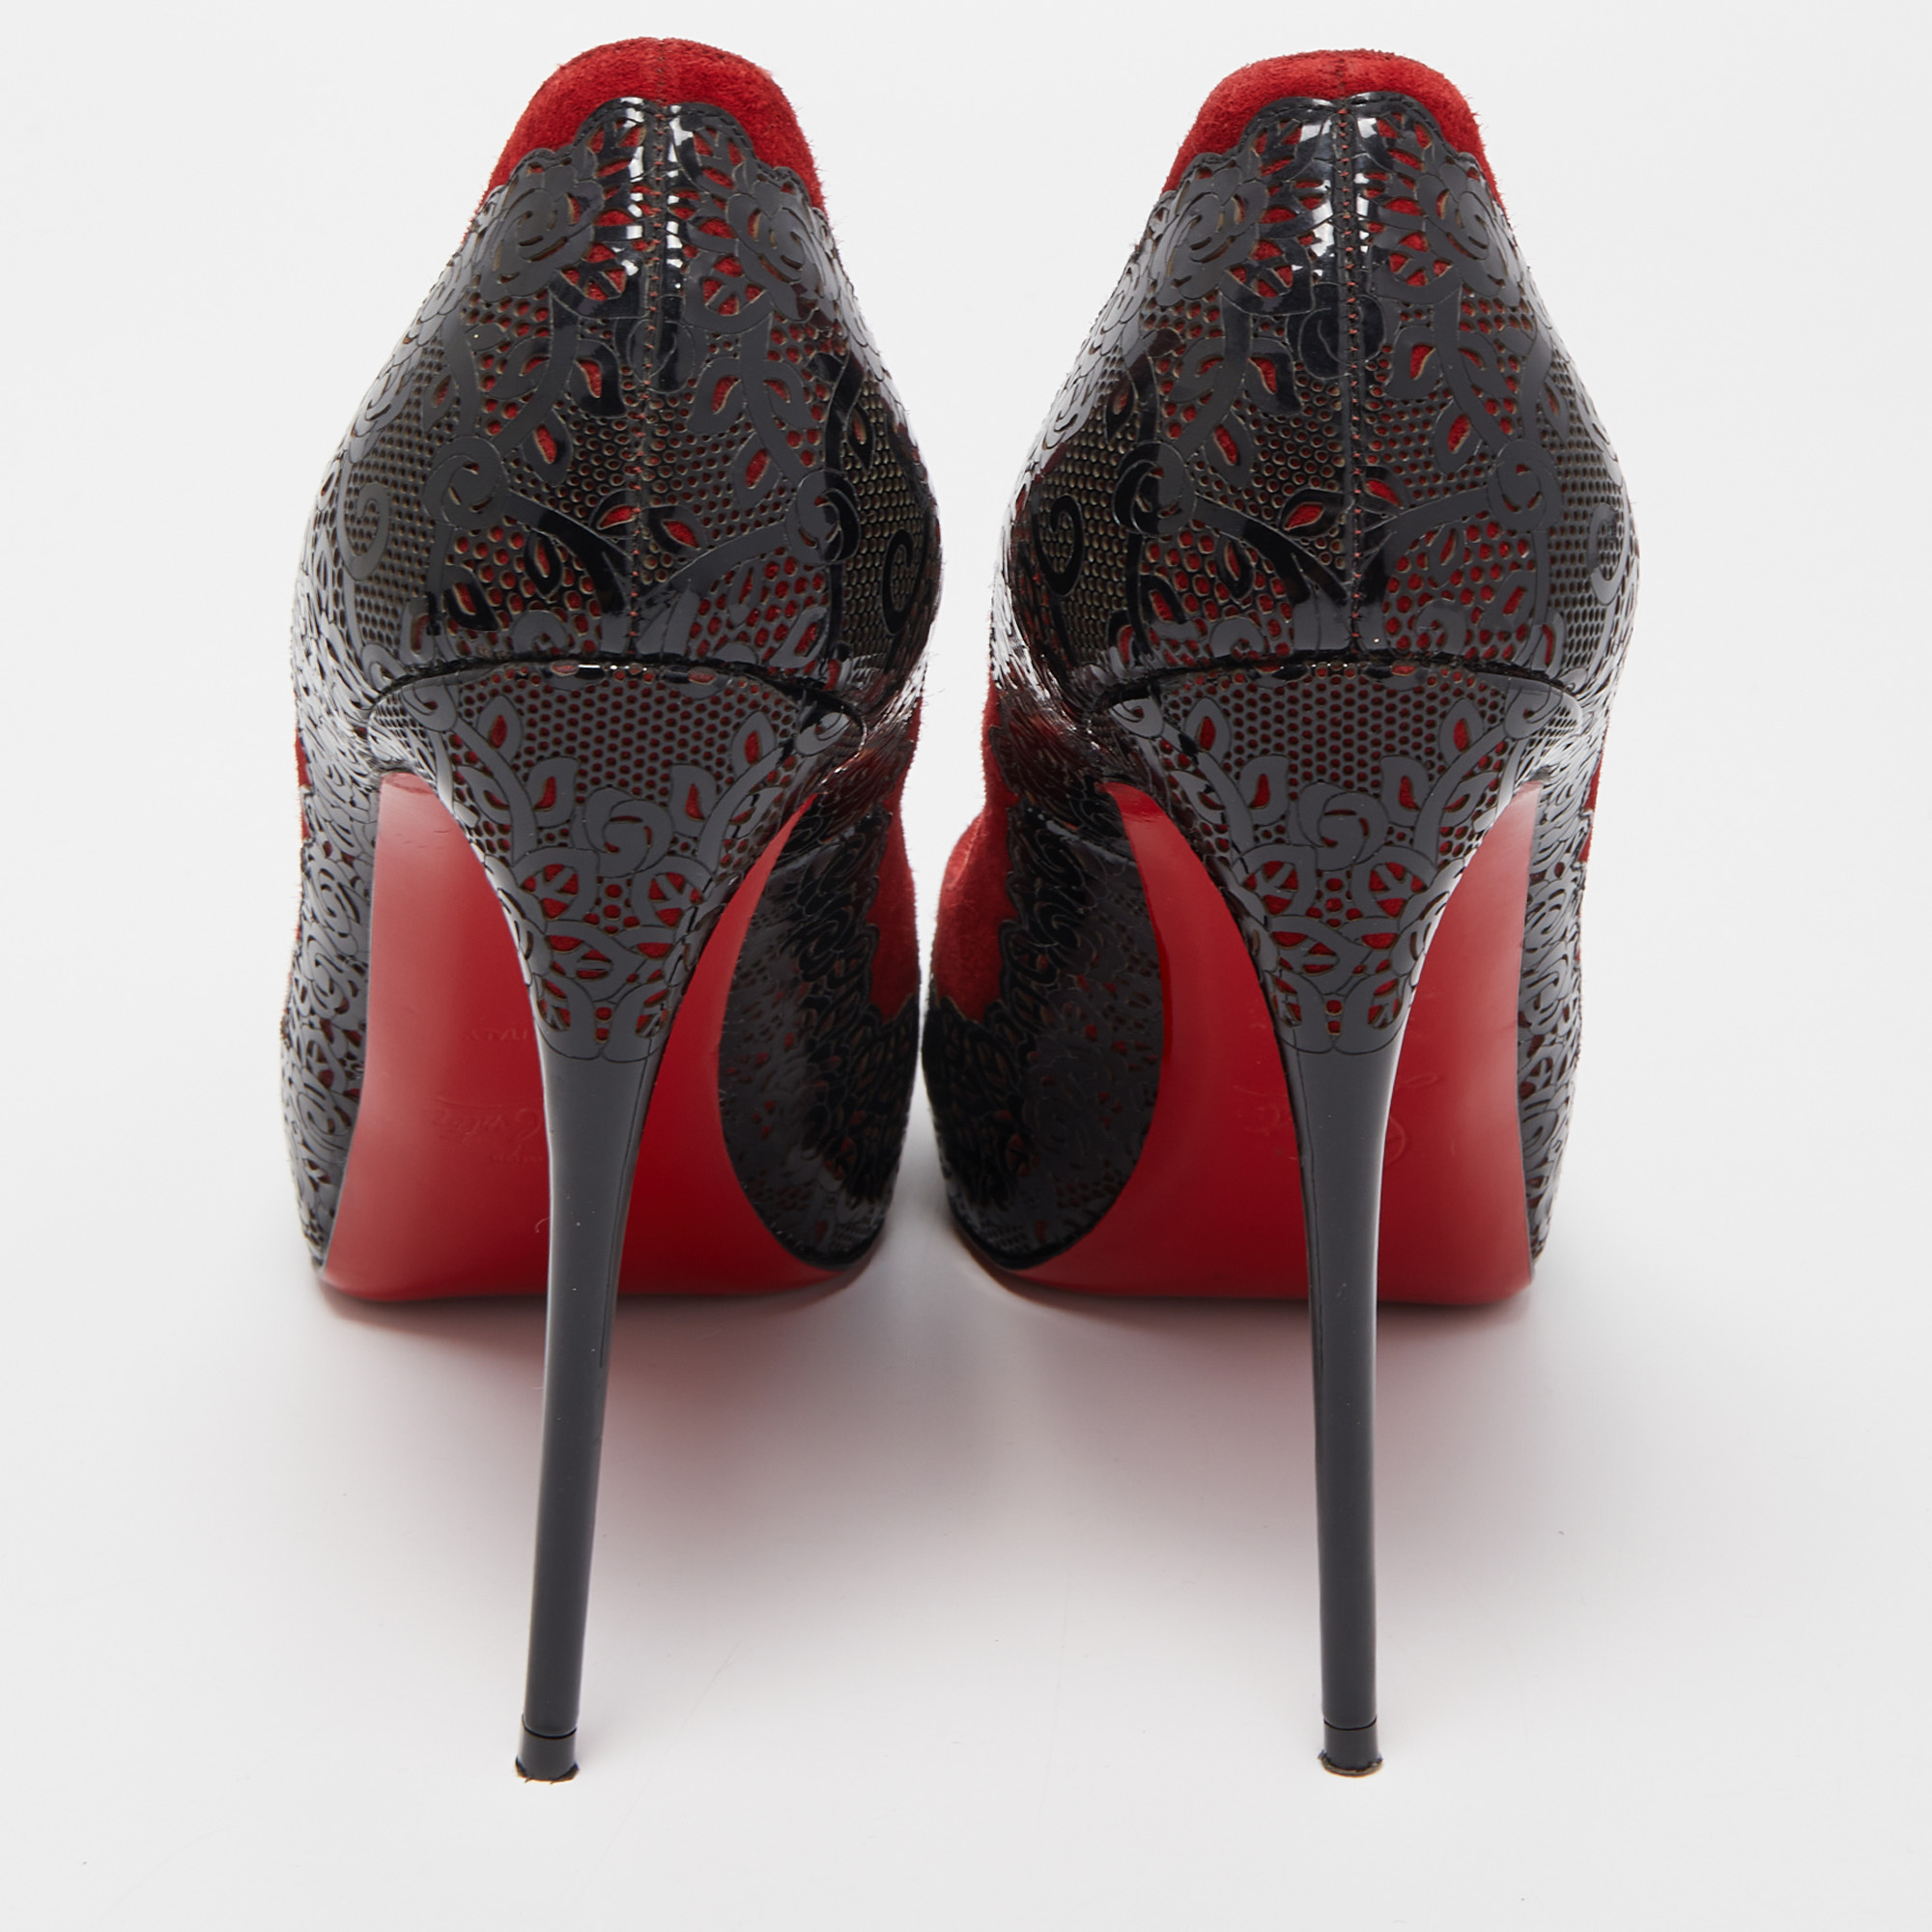 Christian Louboutin Black/Red Laser Cut Patent Leather And Suede Veramucha Pumps Size 39